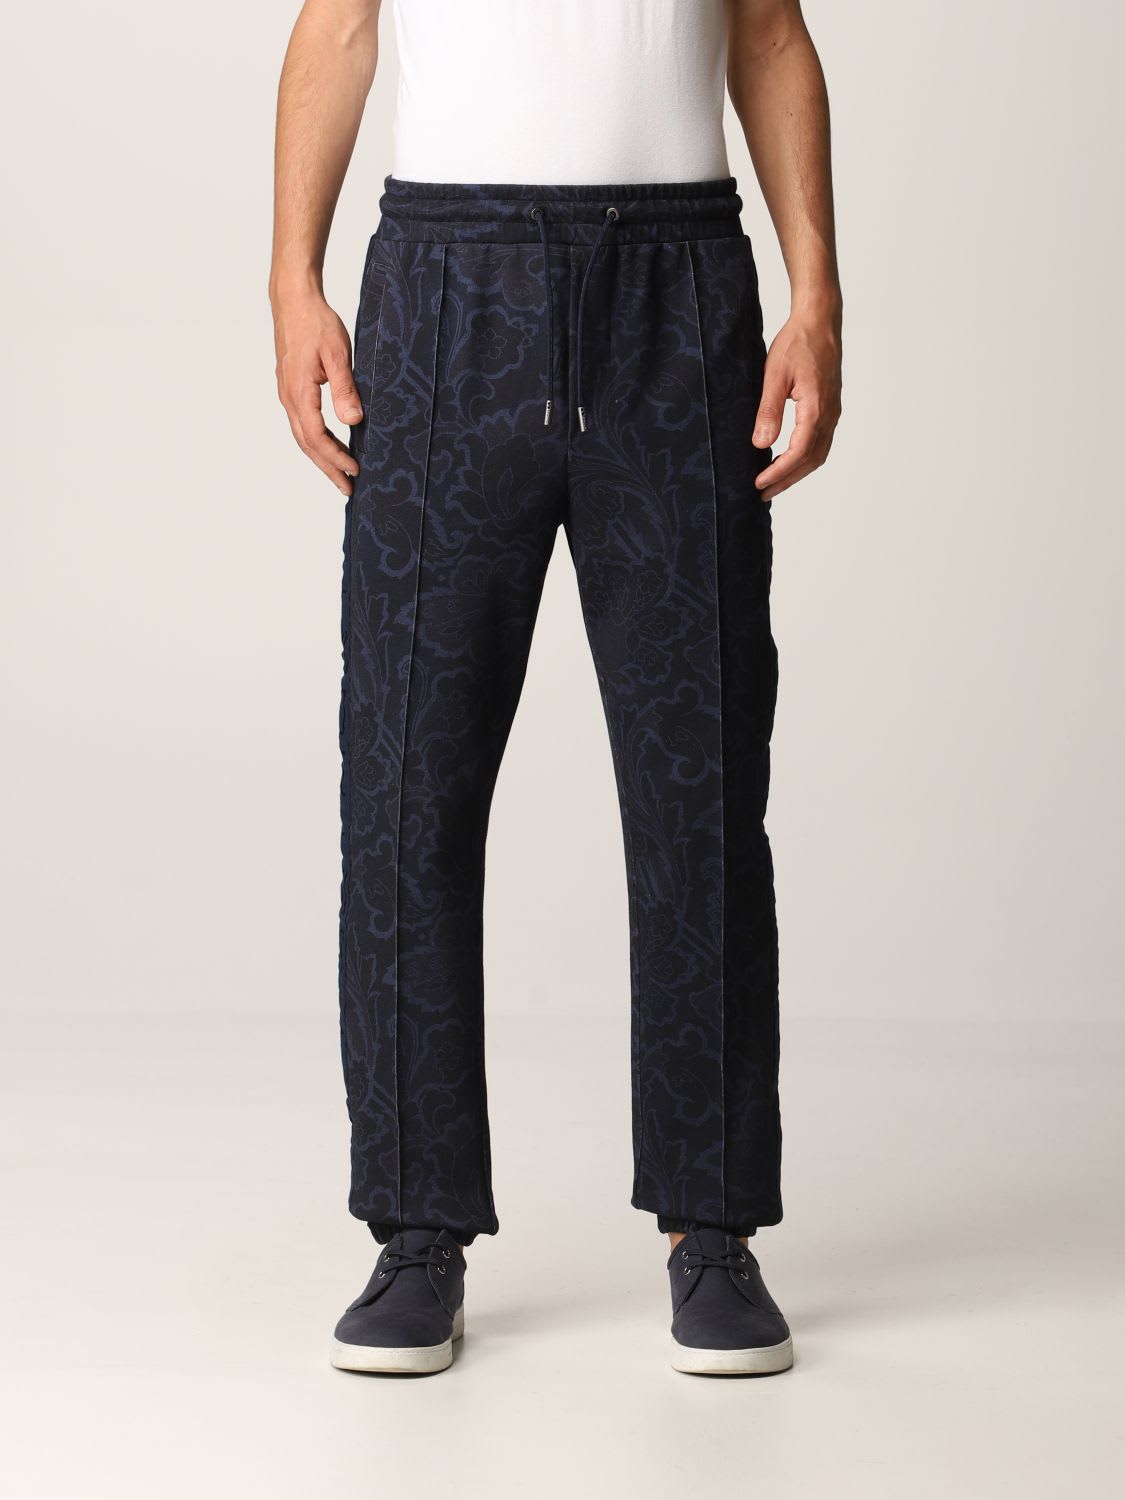 Etro Pants Etro Jogging Pants In Cotton With Paisley Pattern